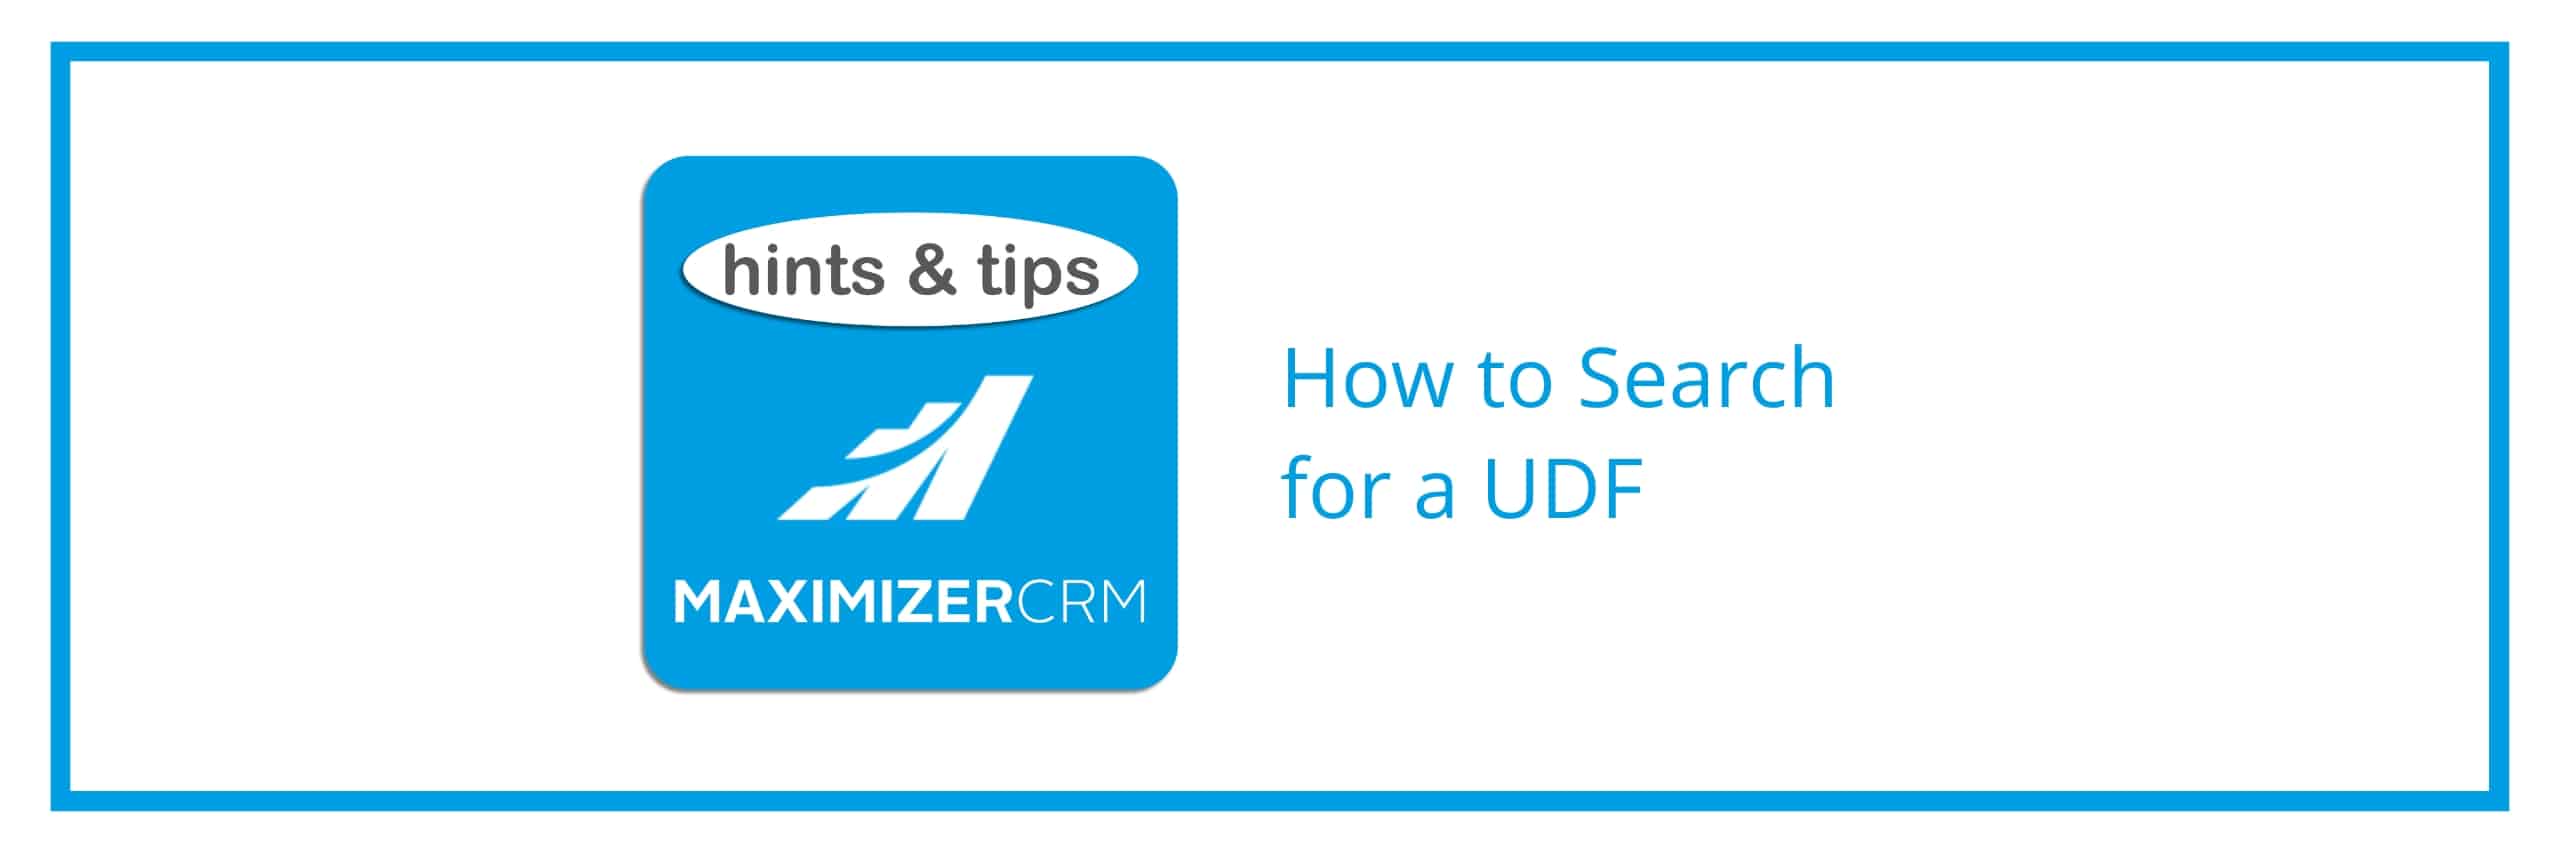 Hints & Tips - How to Search for a UDF